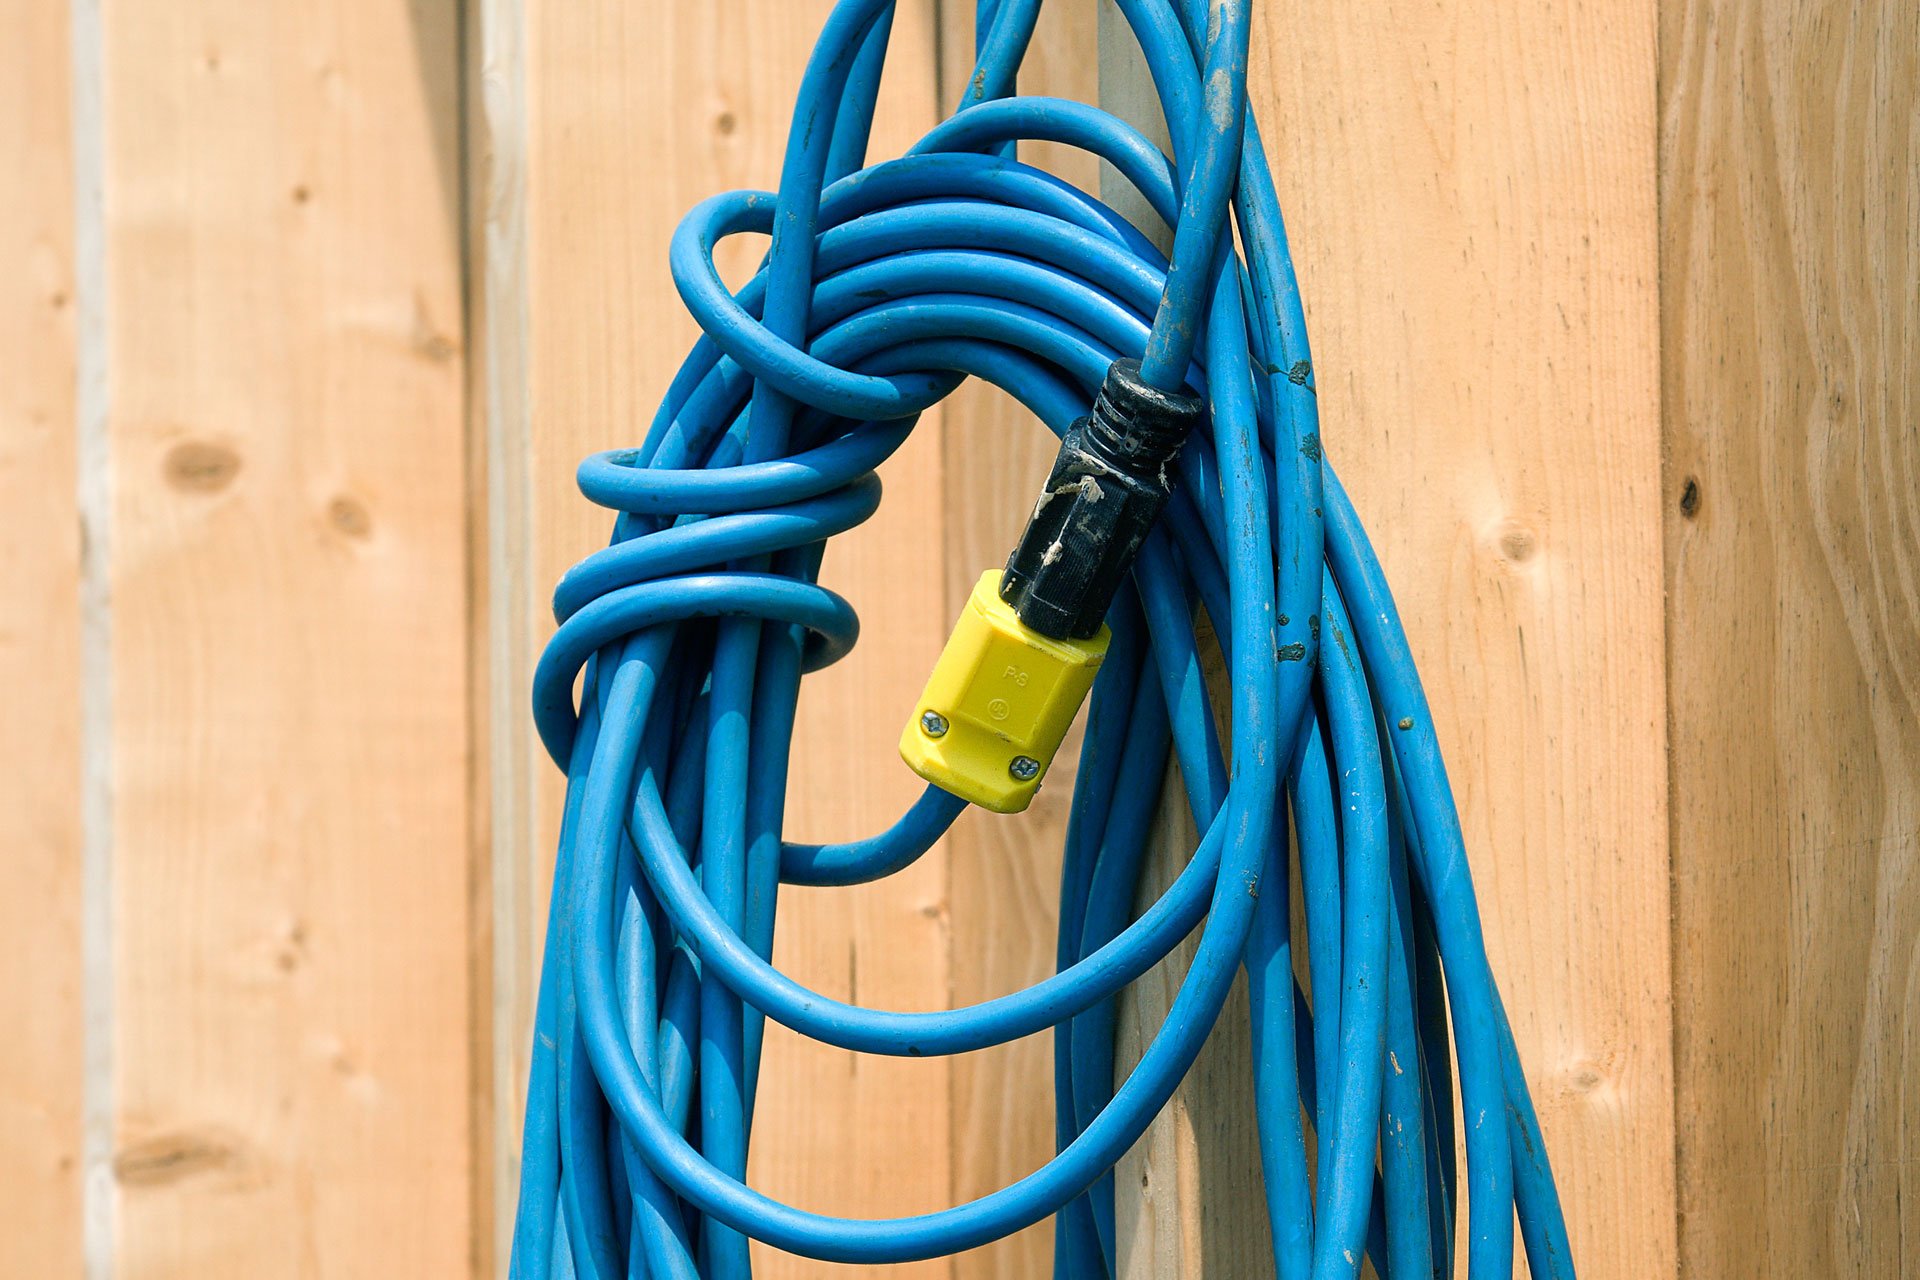 Shop of Components for Covering Outdoor Cables